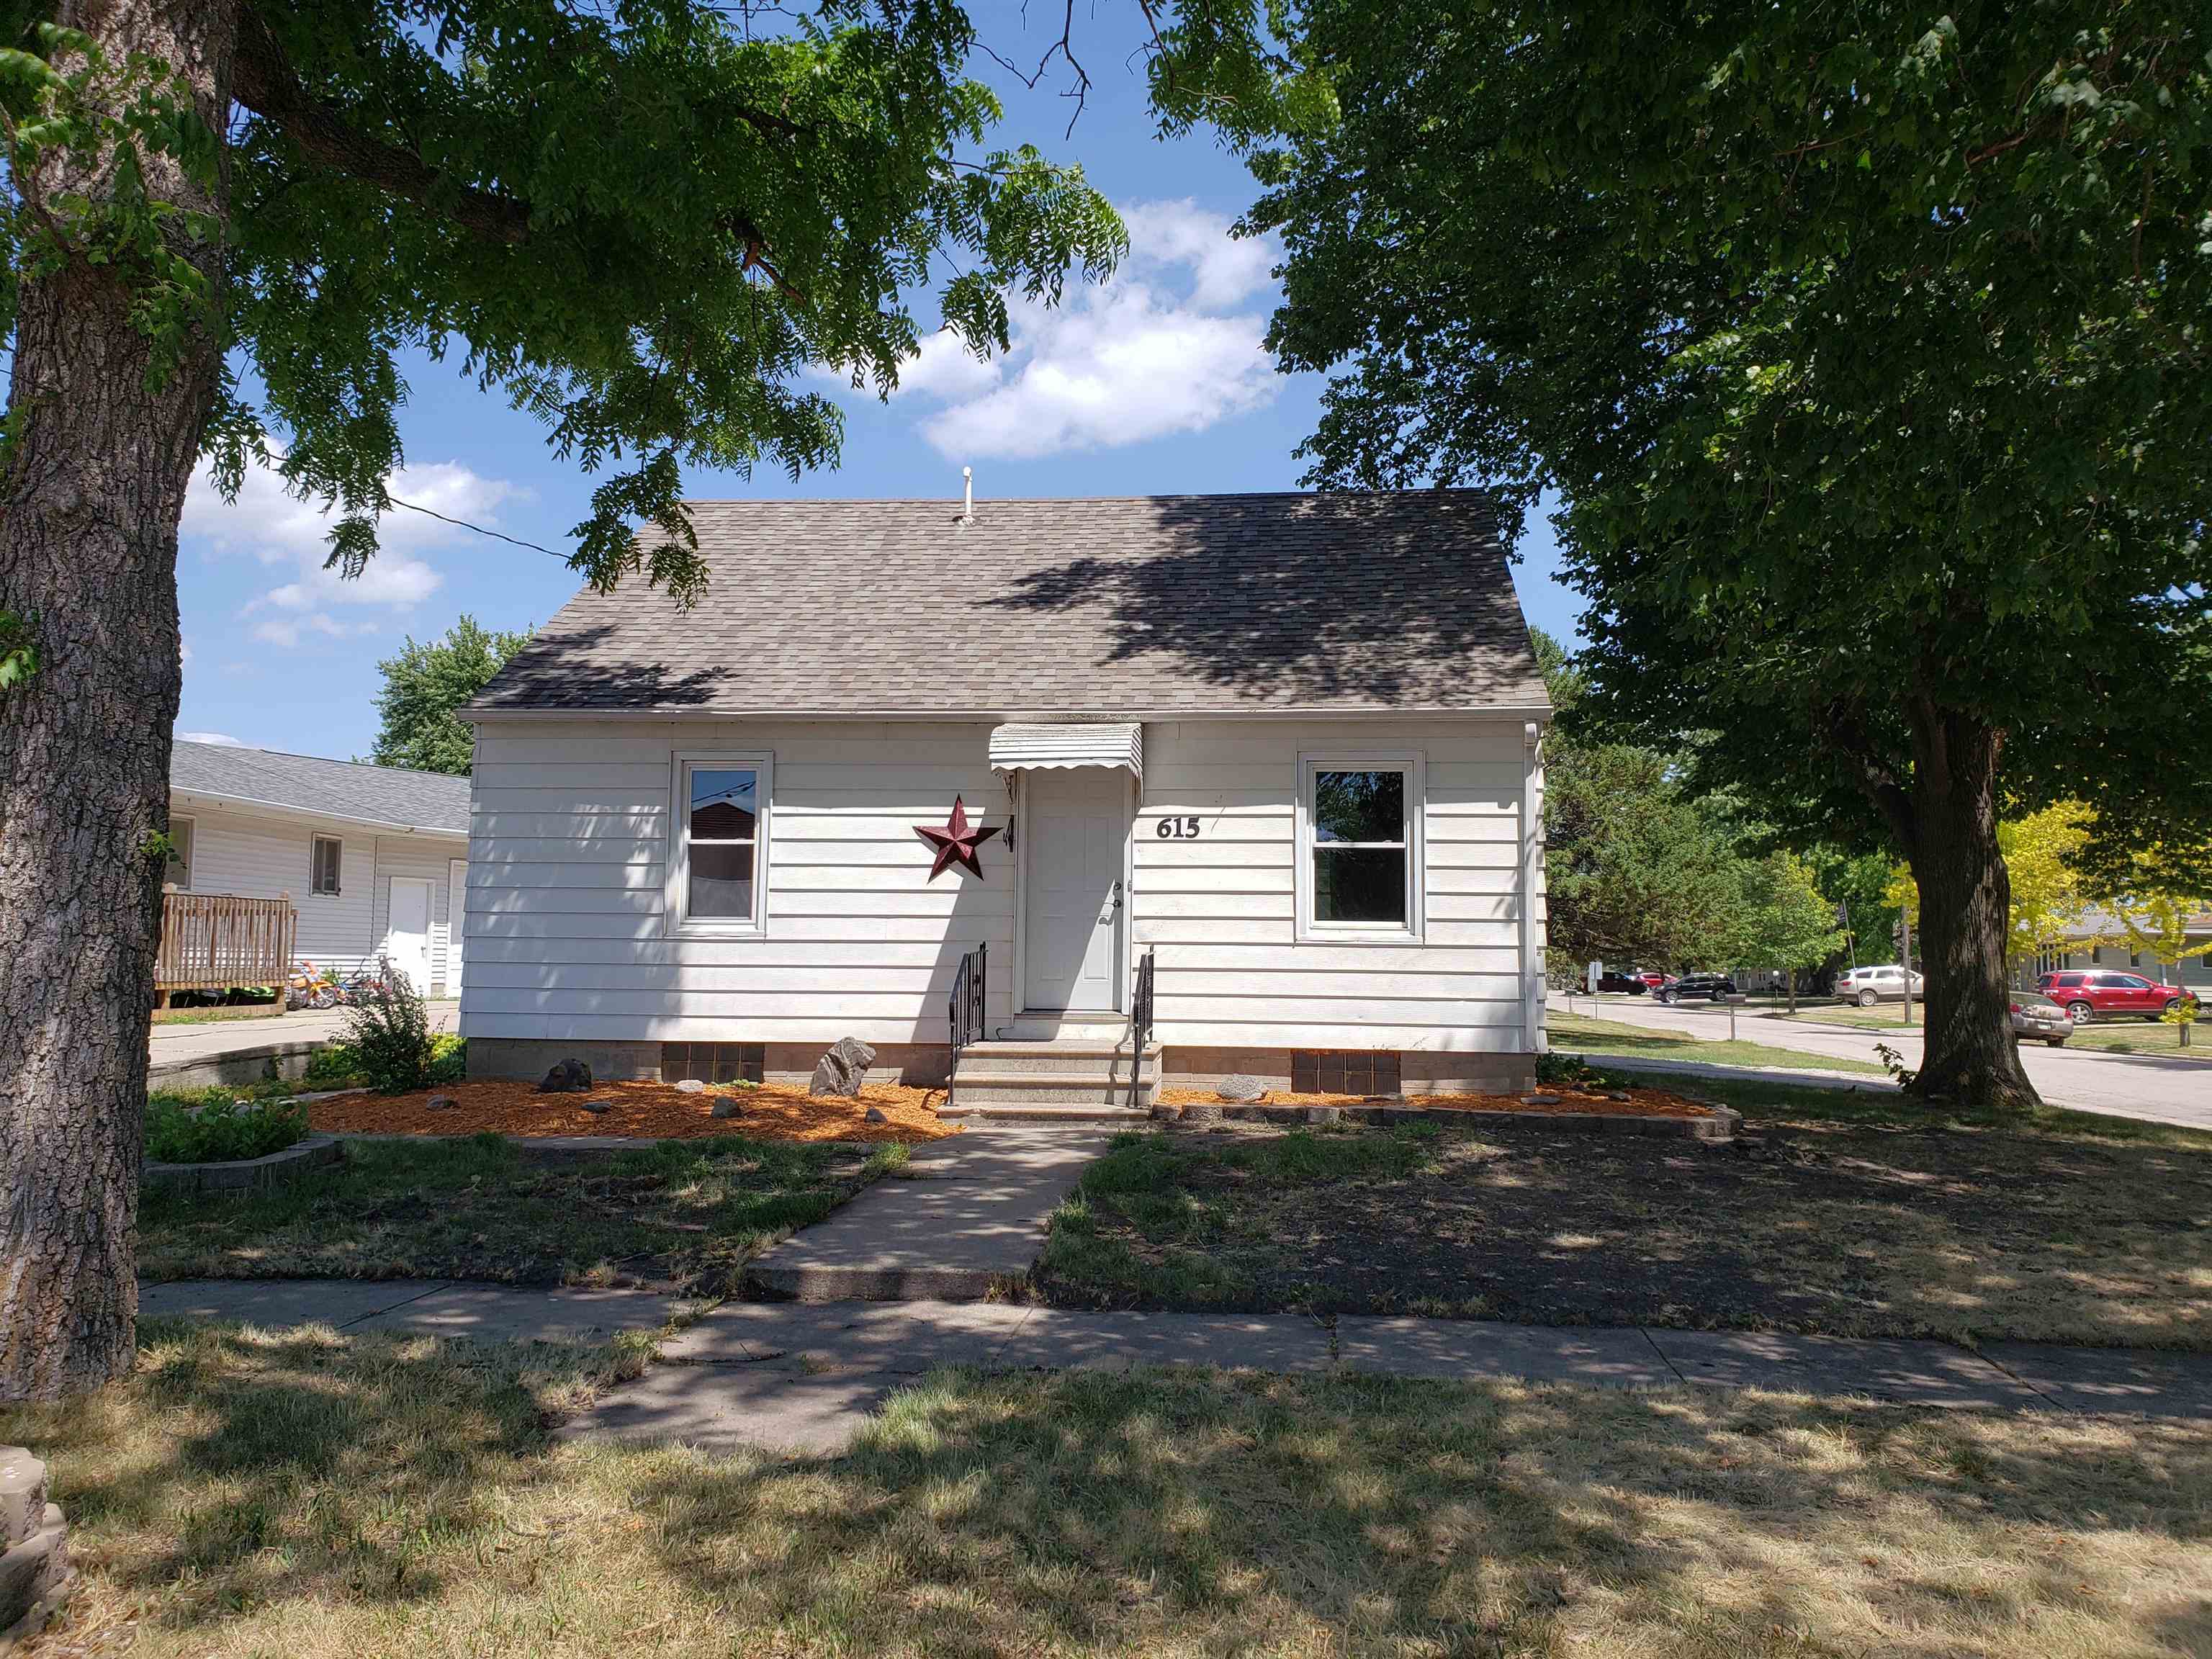 615 2nd Street, Whittemore, IA 50598 